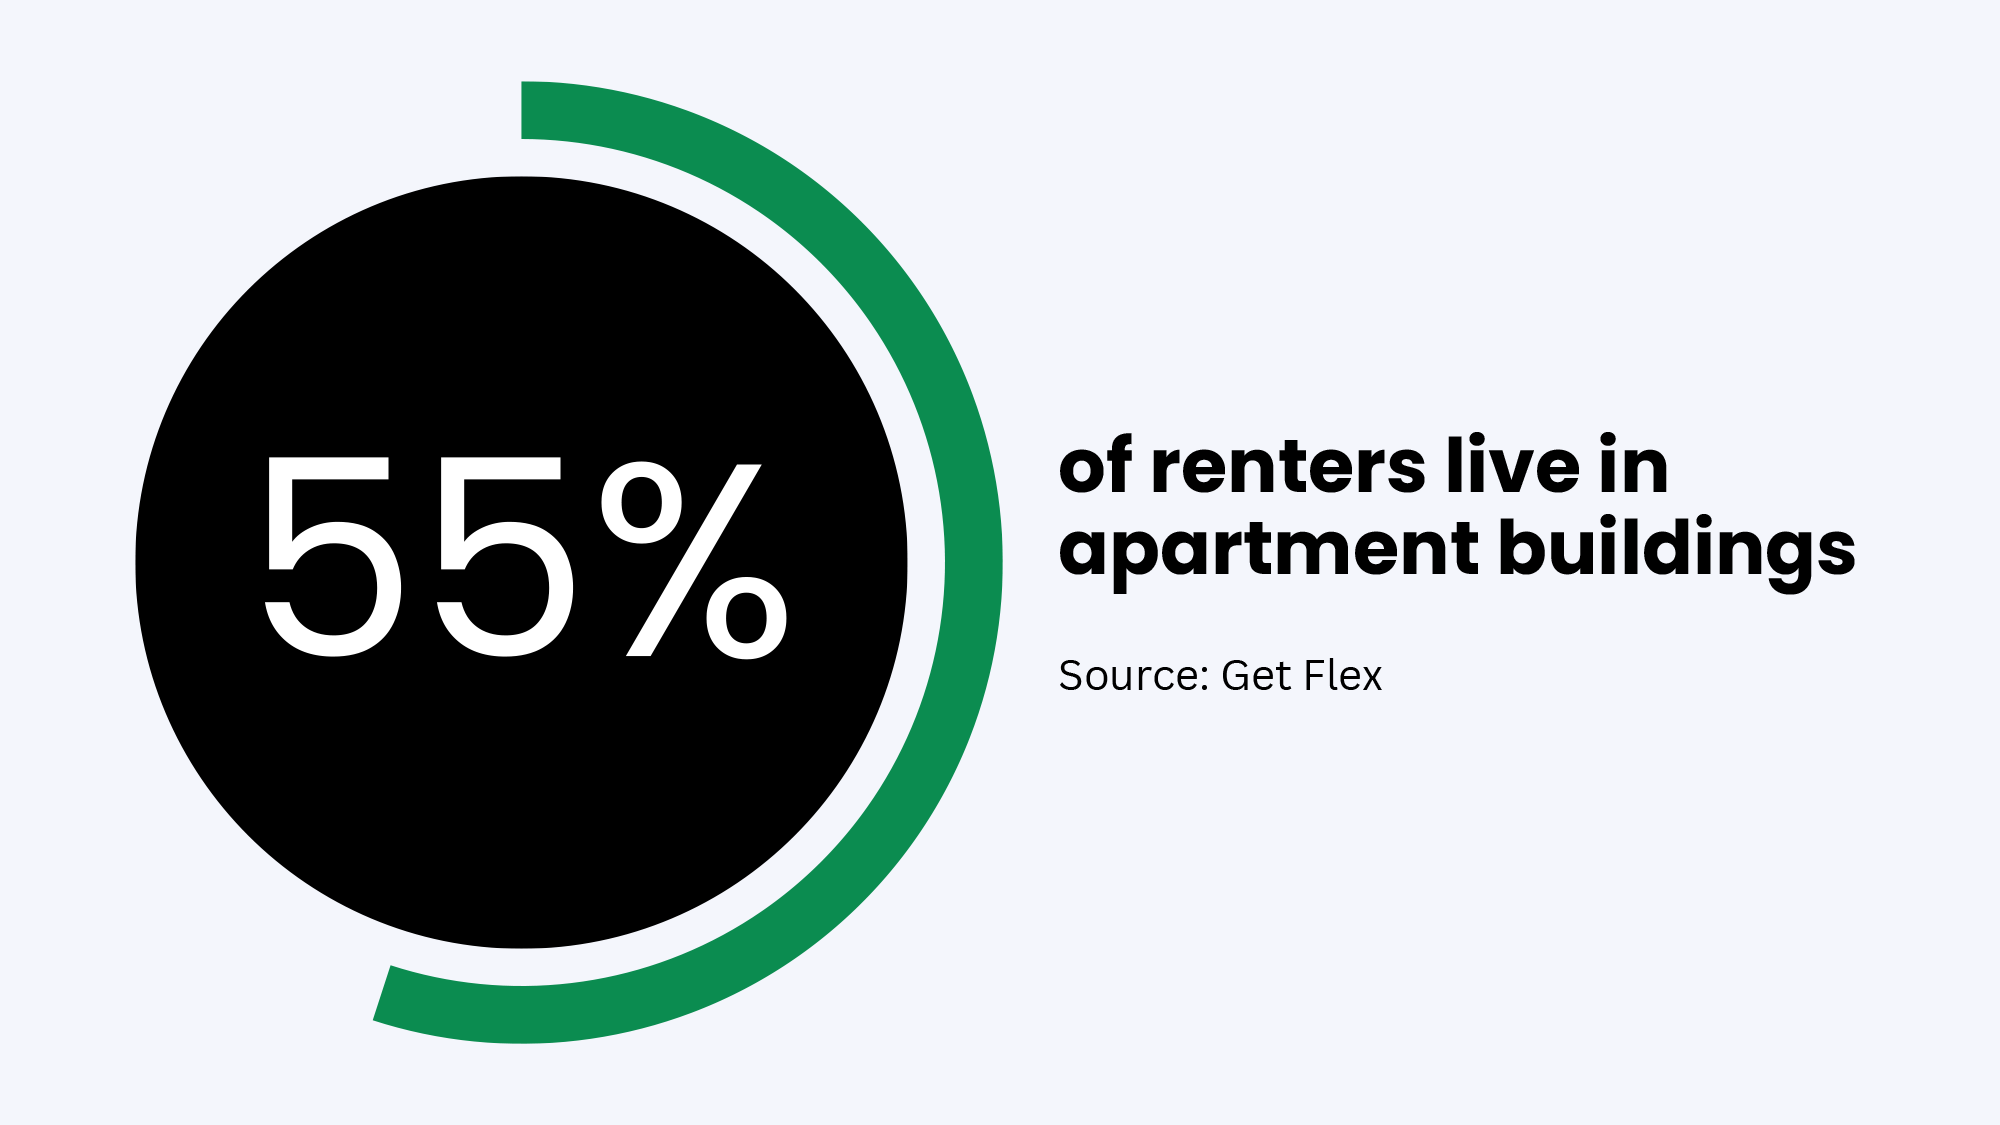 55% of renters live in apartment buildings